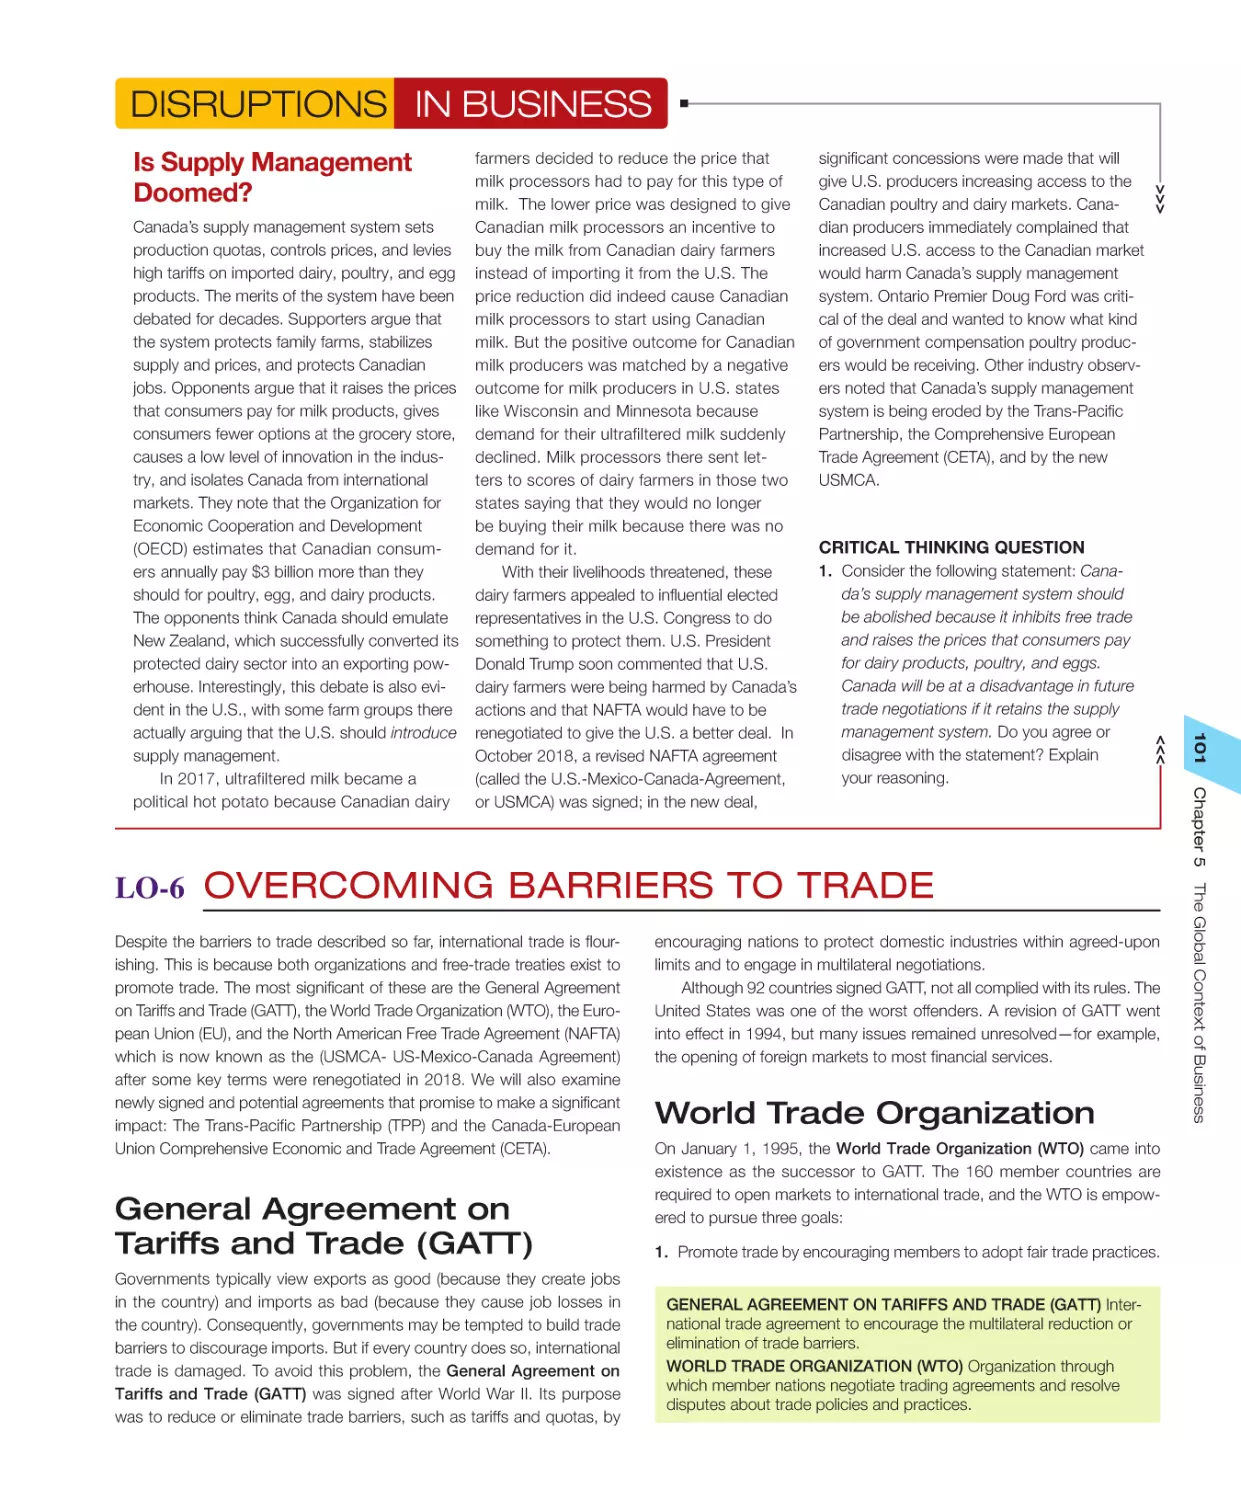 DISRUPTIONS IN BUSINESS Is Supply ManagementDoomed?
LO‐6 Overcoming Barriers to Trade
World Trade Organization